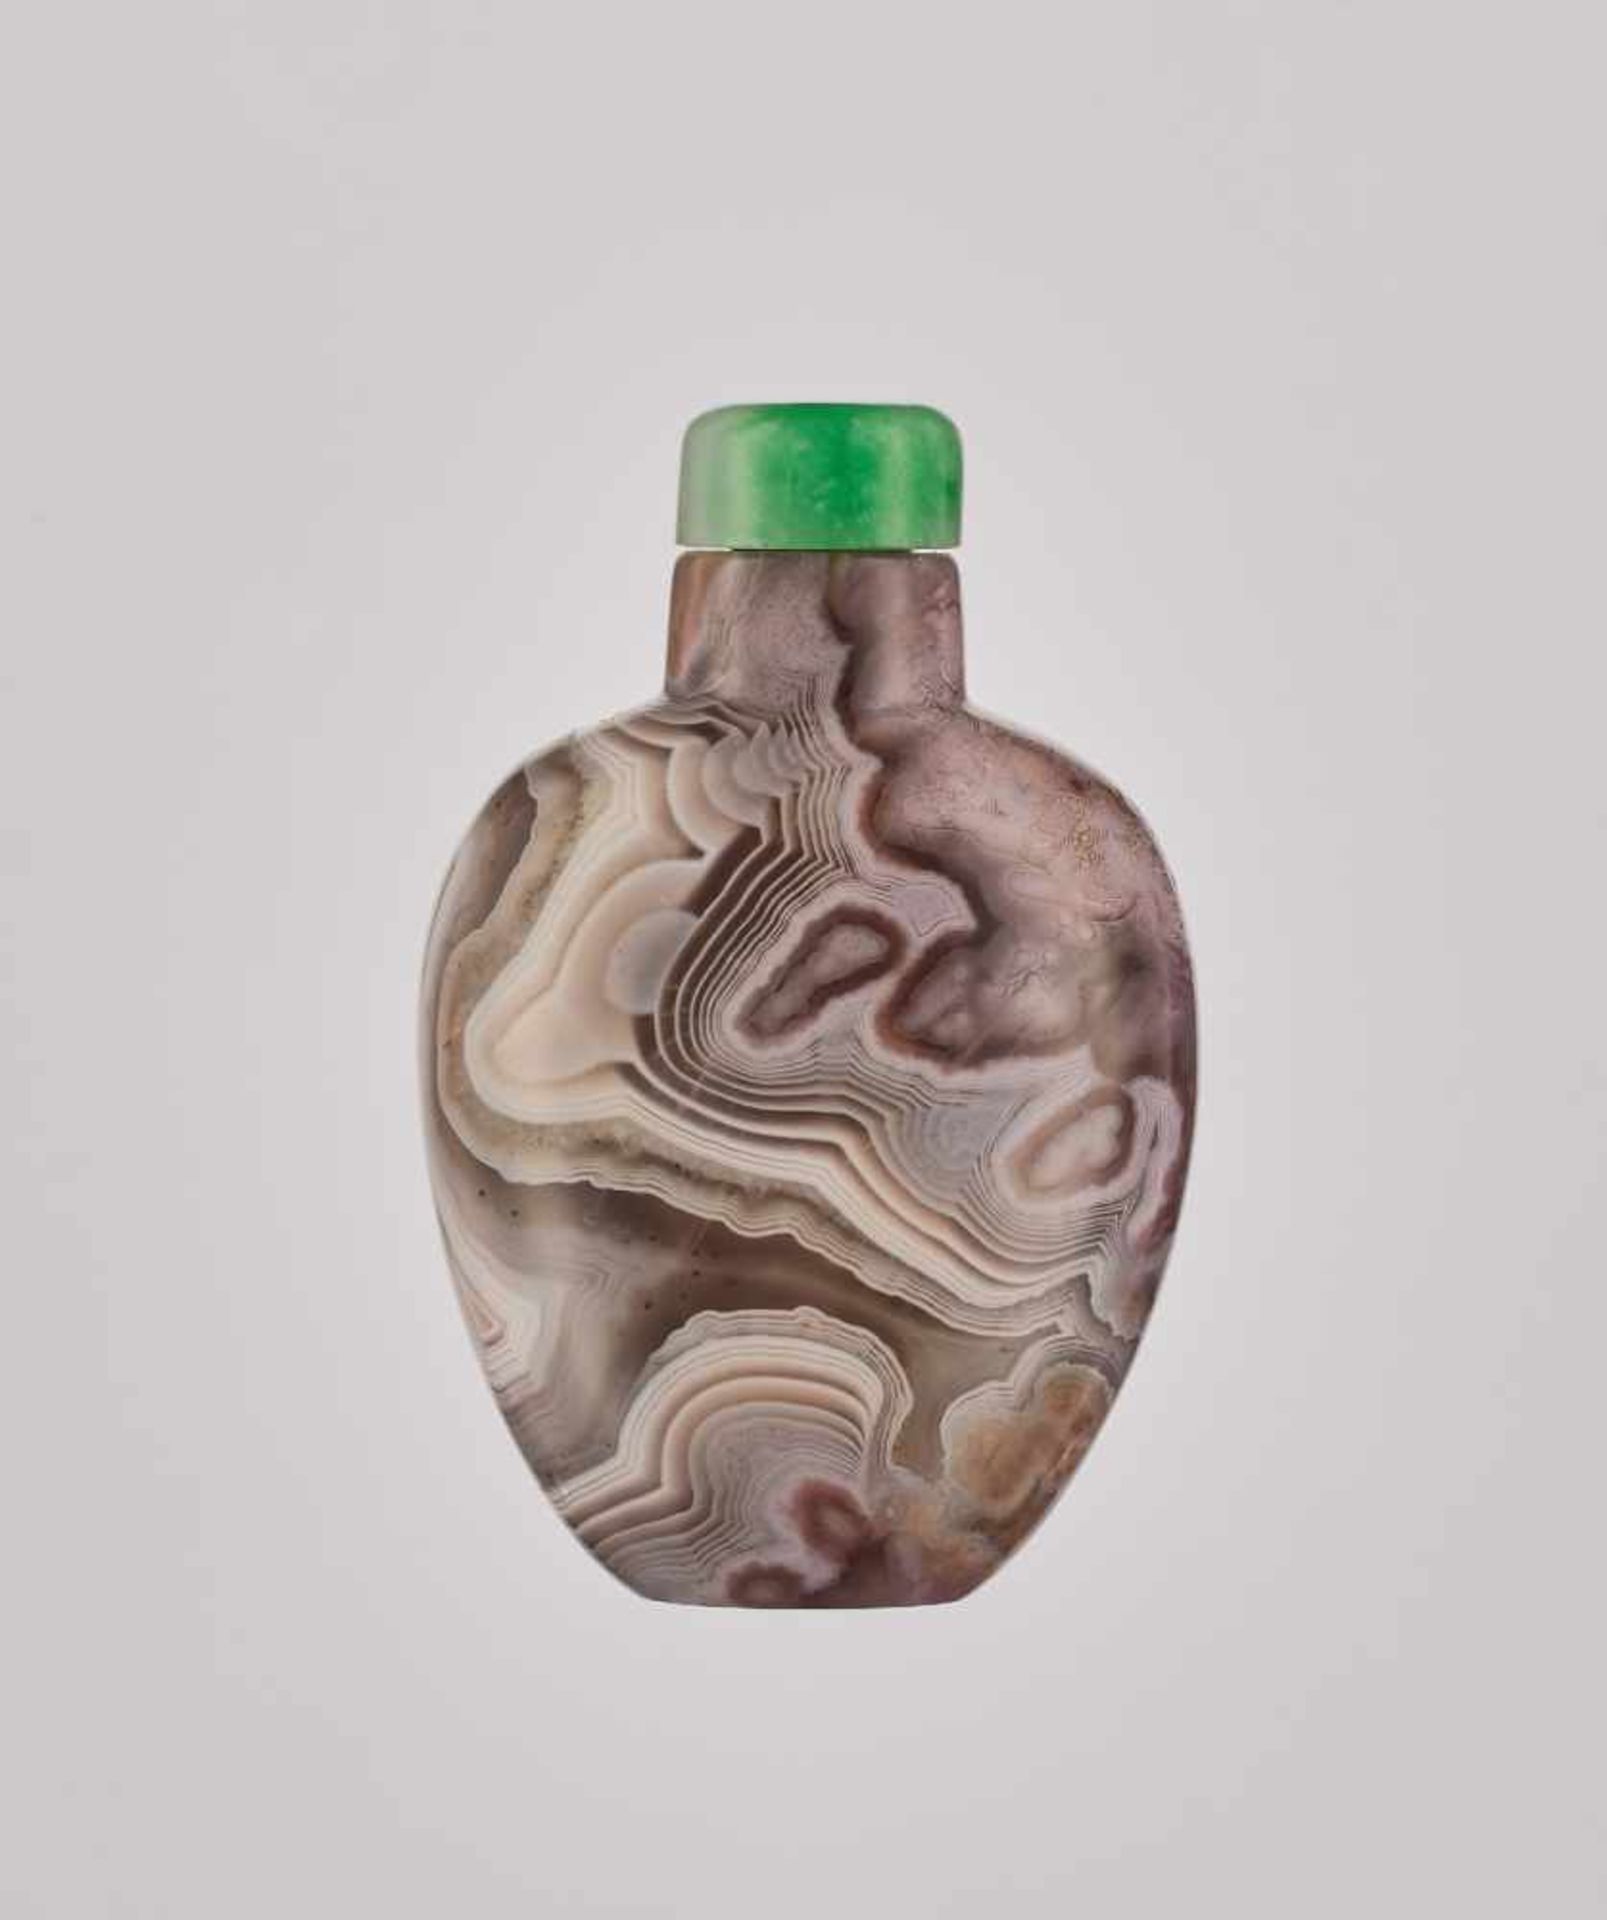 A 'THUMBPRINT' AGATE SNUFF BOTTLE, QING DYNASTY Agate with a smooth polish. China, 1750-1880The